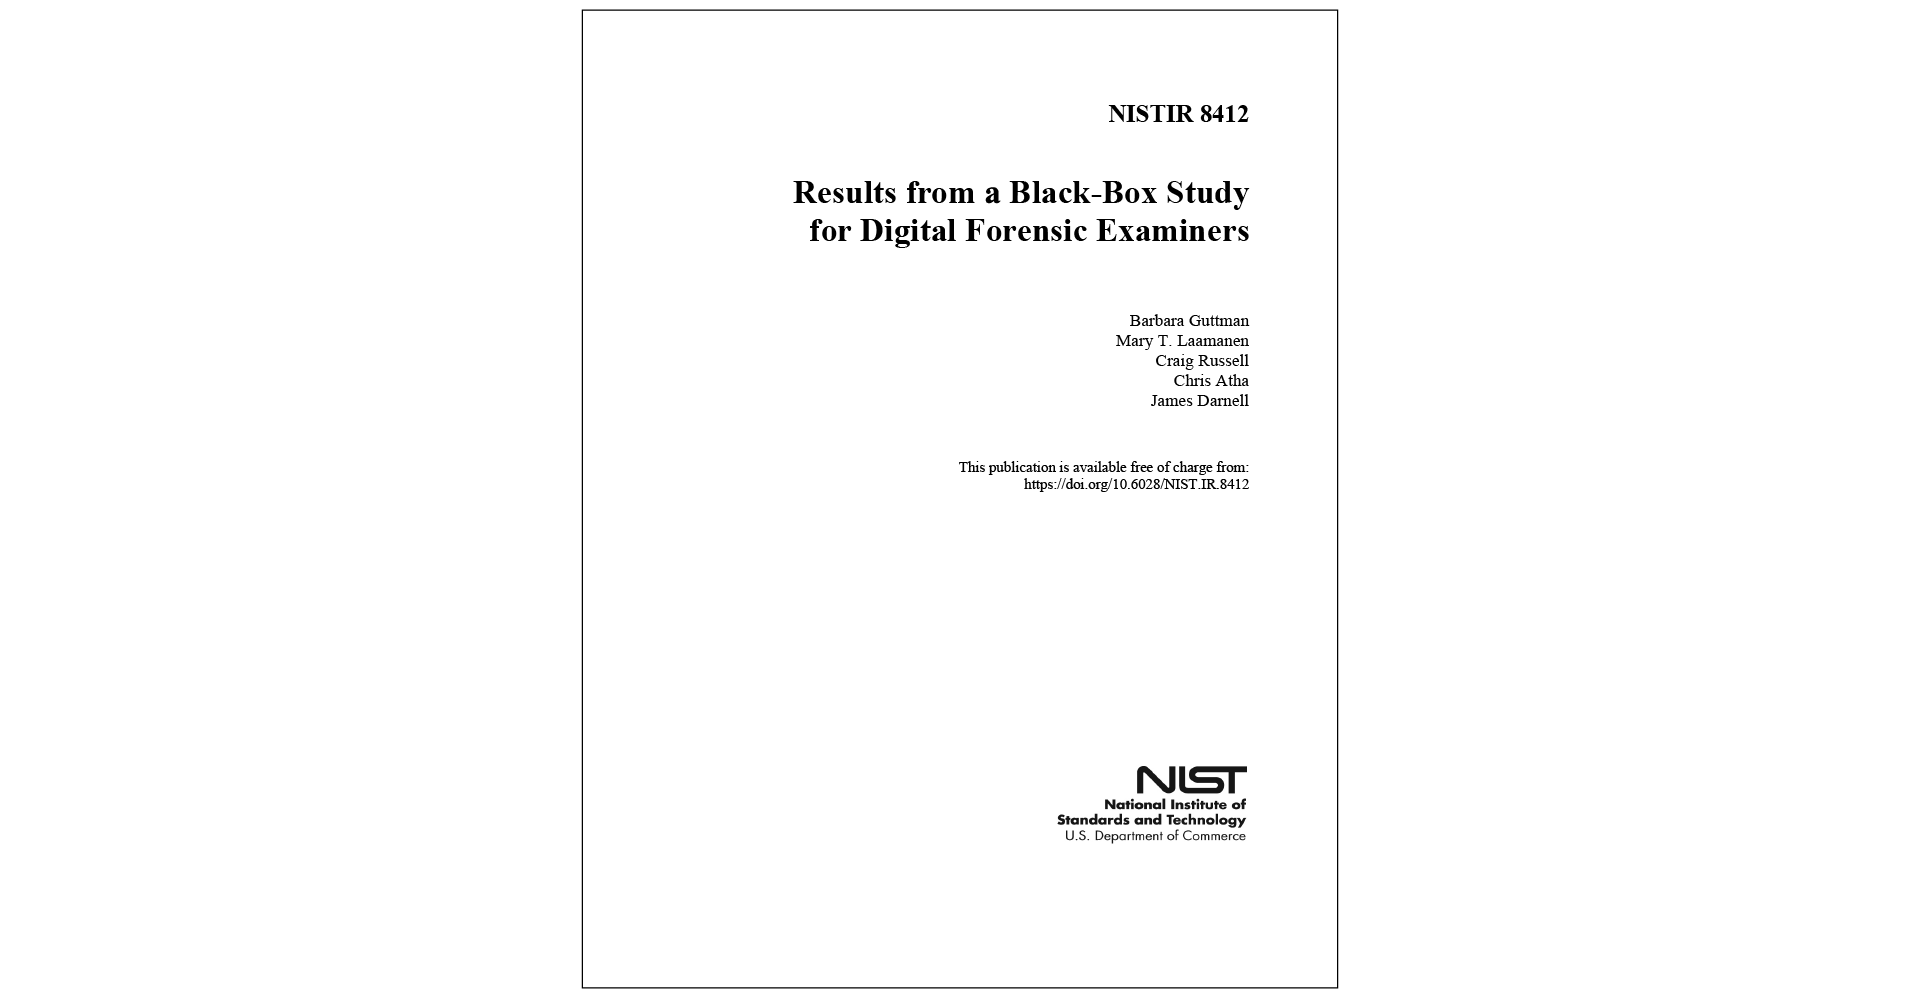 NIST Black Box Study for Digital Forensic Examiners